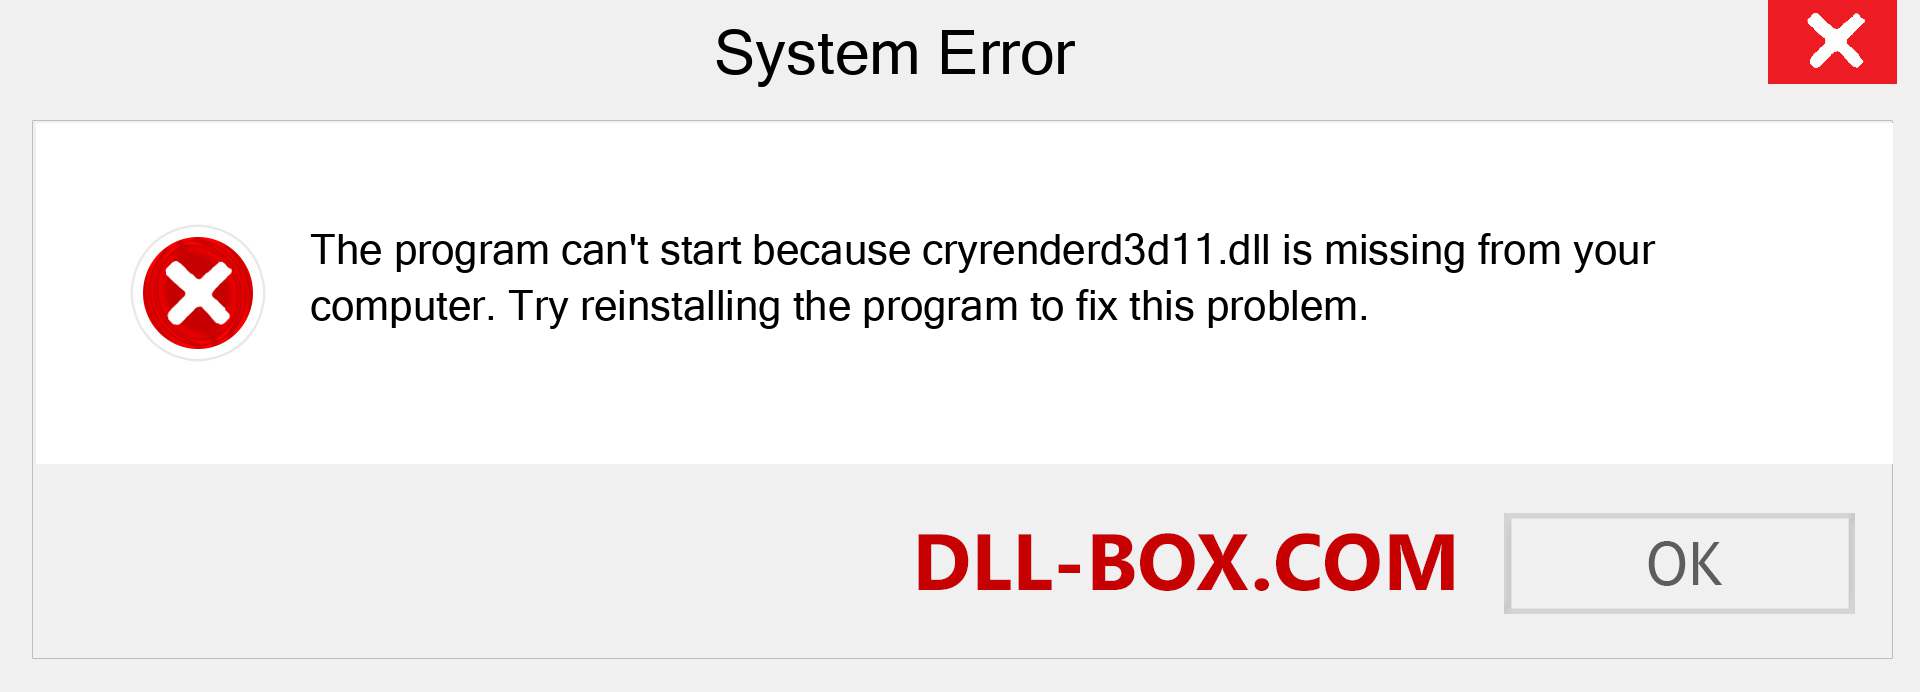  cryrenderd3d11.dll file is missing?. Download for Windows 7, 8, 10 - Fix  cryrenderd3d11 dll Missing Error on Windows, photos, images